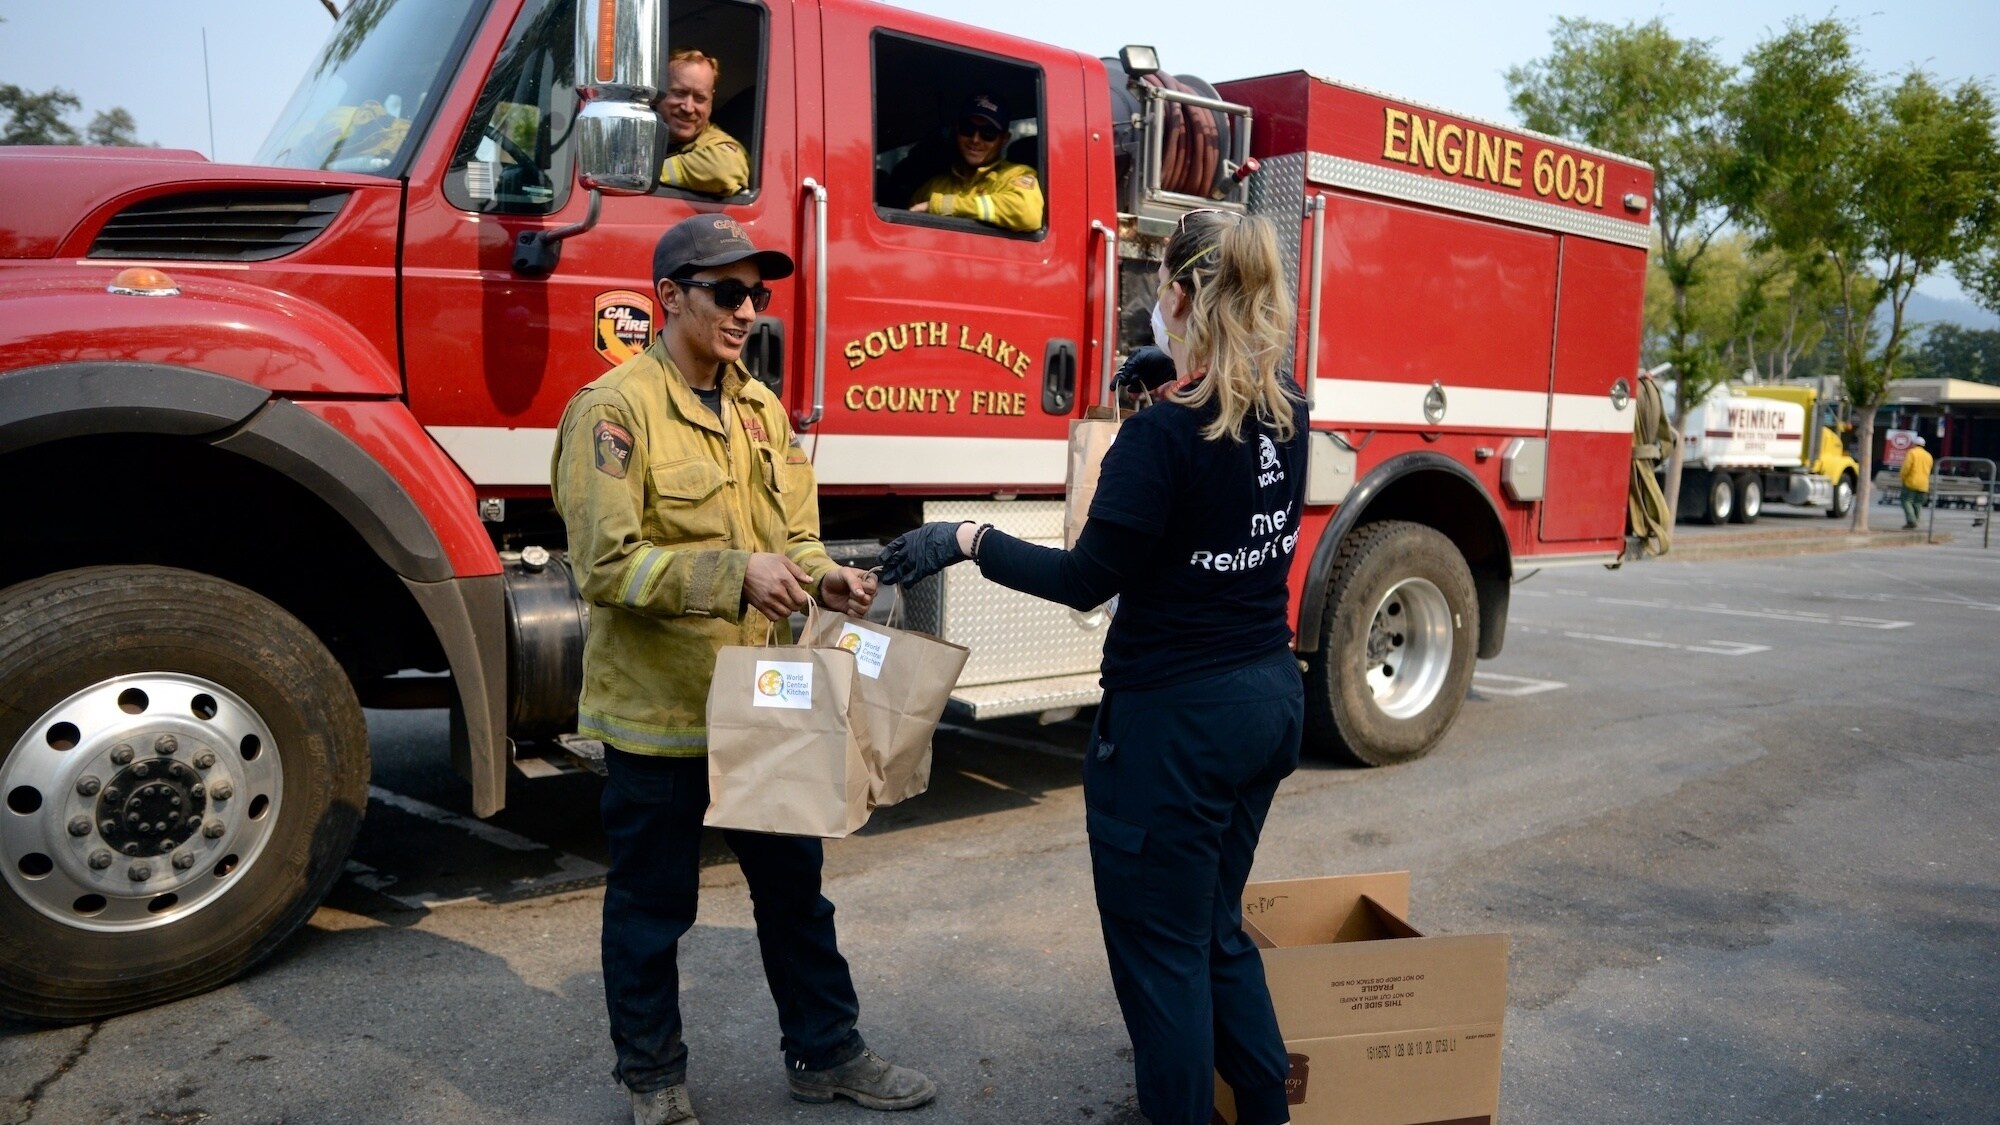 World Central Kitchen Operations Lead, Anna Bornstein (R), hands WCK food bags to CalFire firefighters headed back to fight a wildfire. (Credit: National Geographic/Kelly Galleguillos)